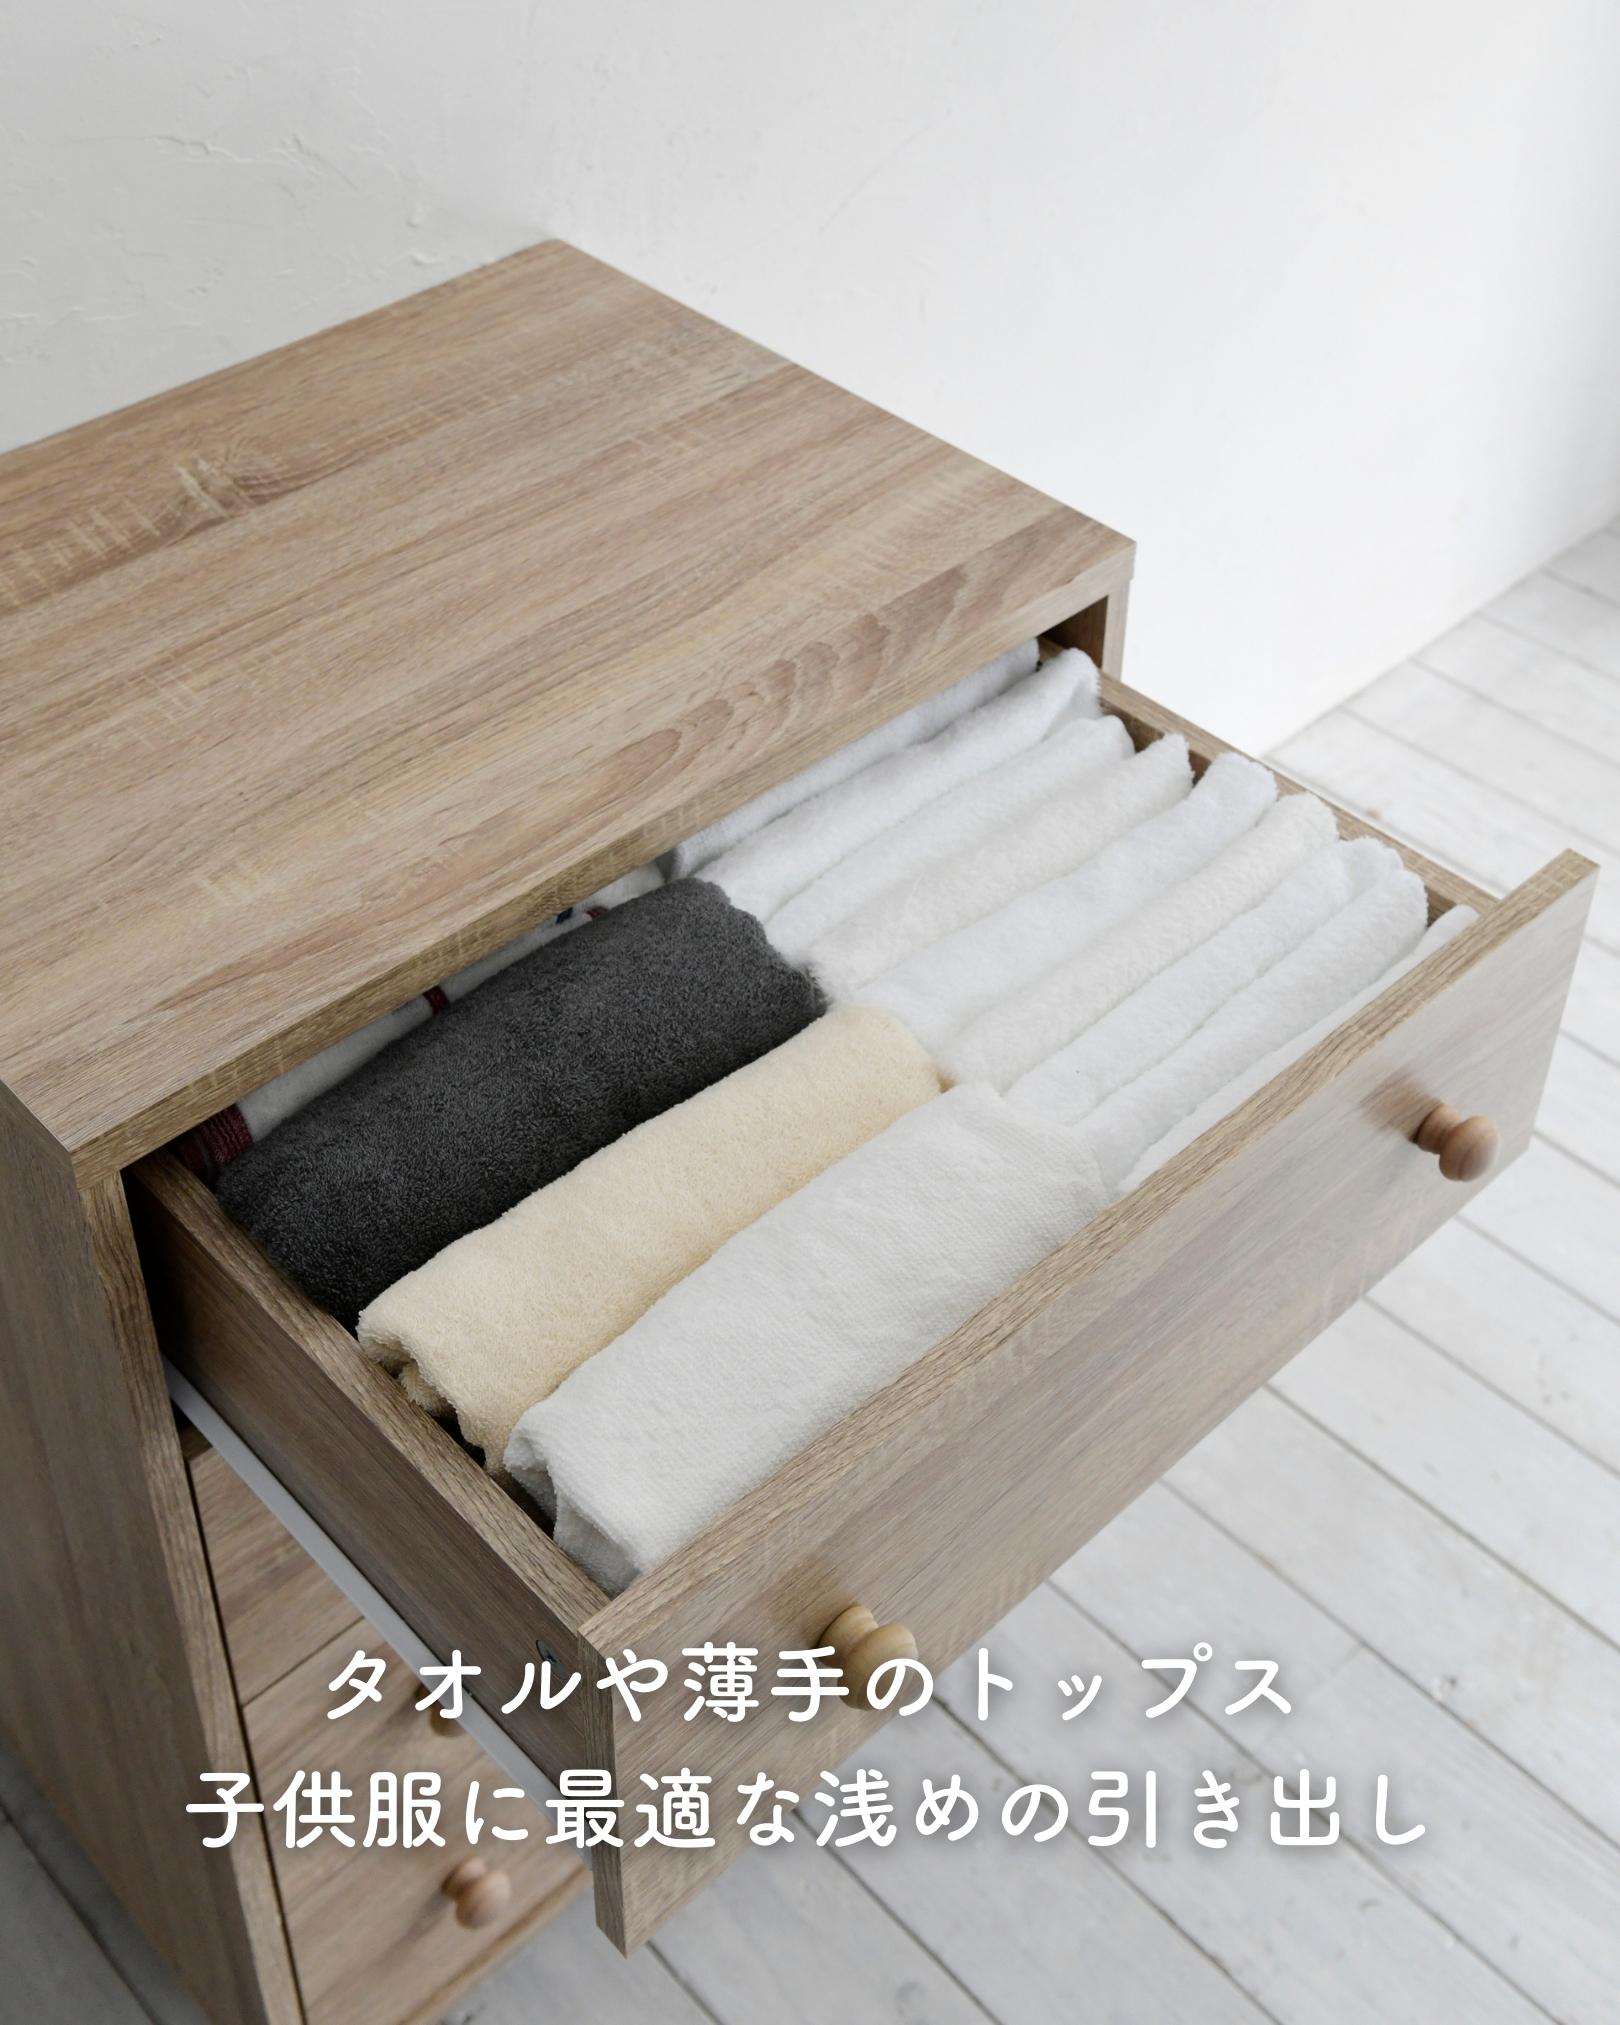  dust. entering difficult wooden chest wide 3 step width 54 depth 42 height 68.5cm lavatory child part shop closet storage laundry chest one person living drawer mountain .